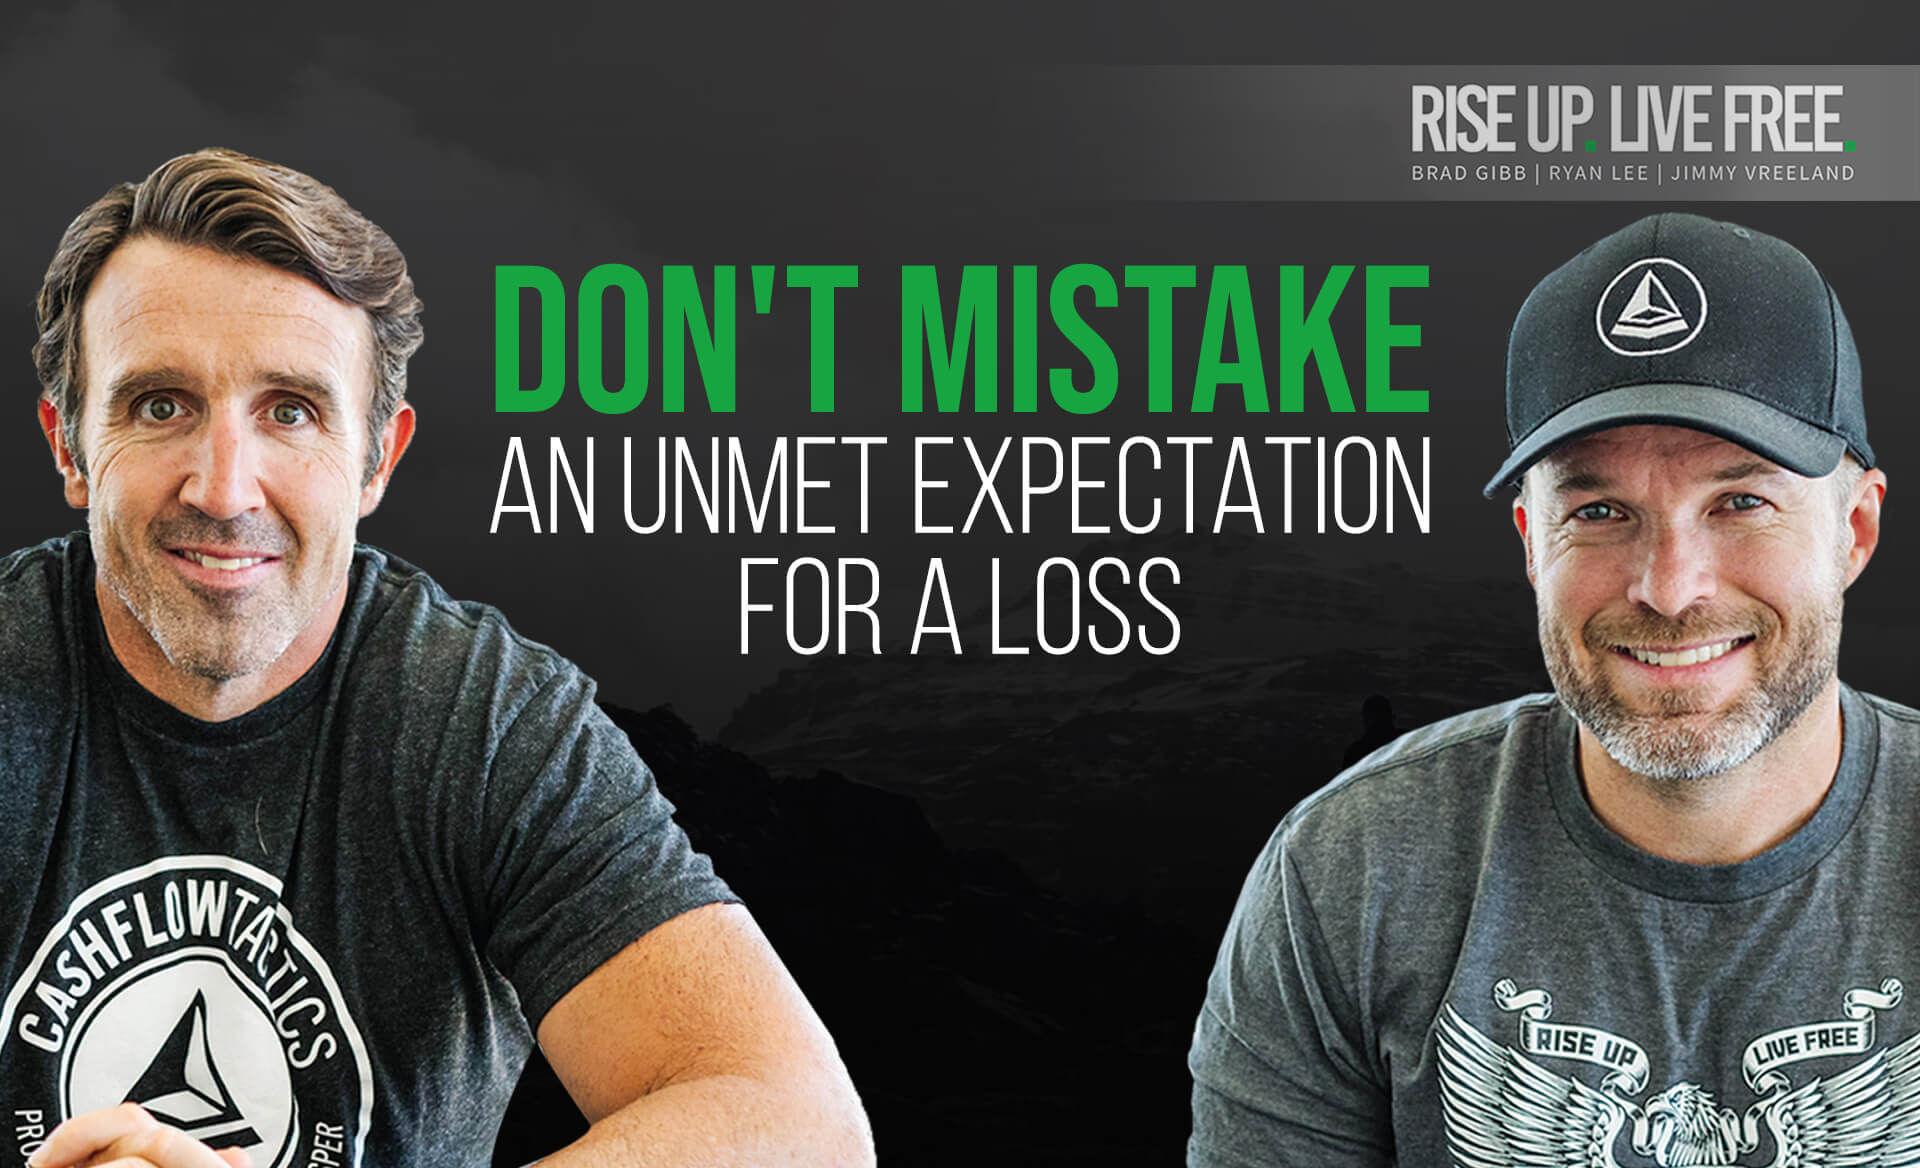 Don't Mistake an Unmet Expectation for a Loss